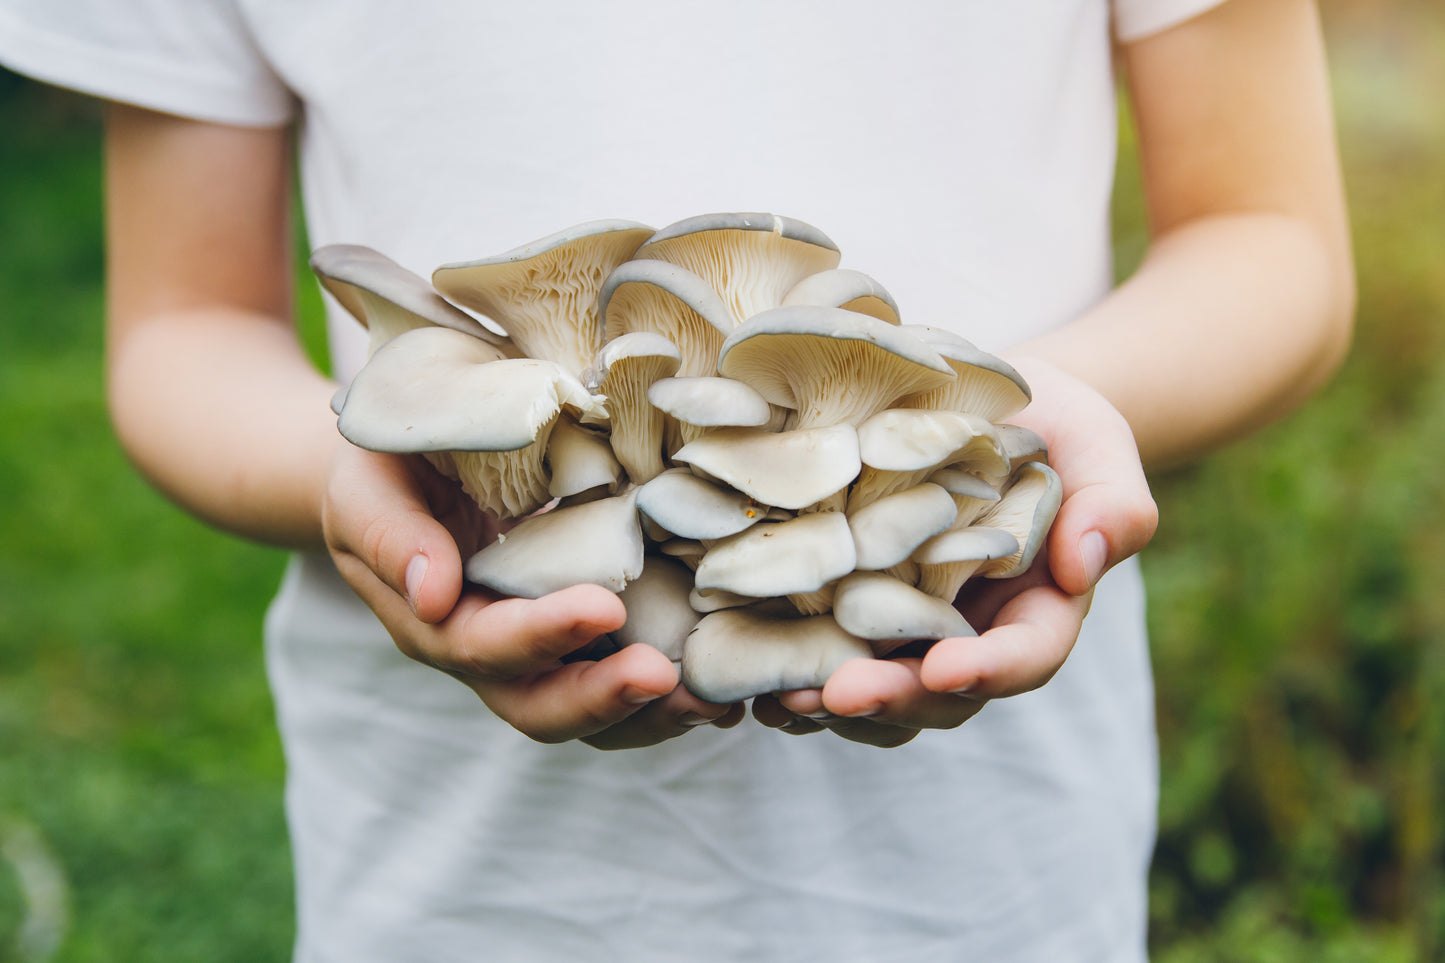 A person holds up a bunch of oyster mushrooms.